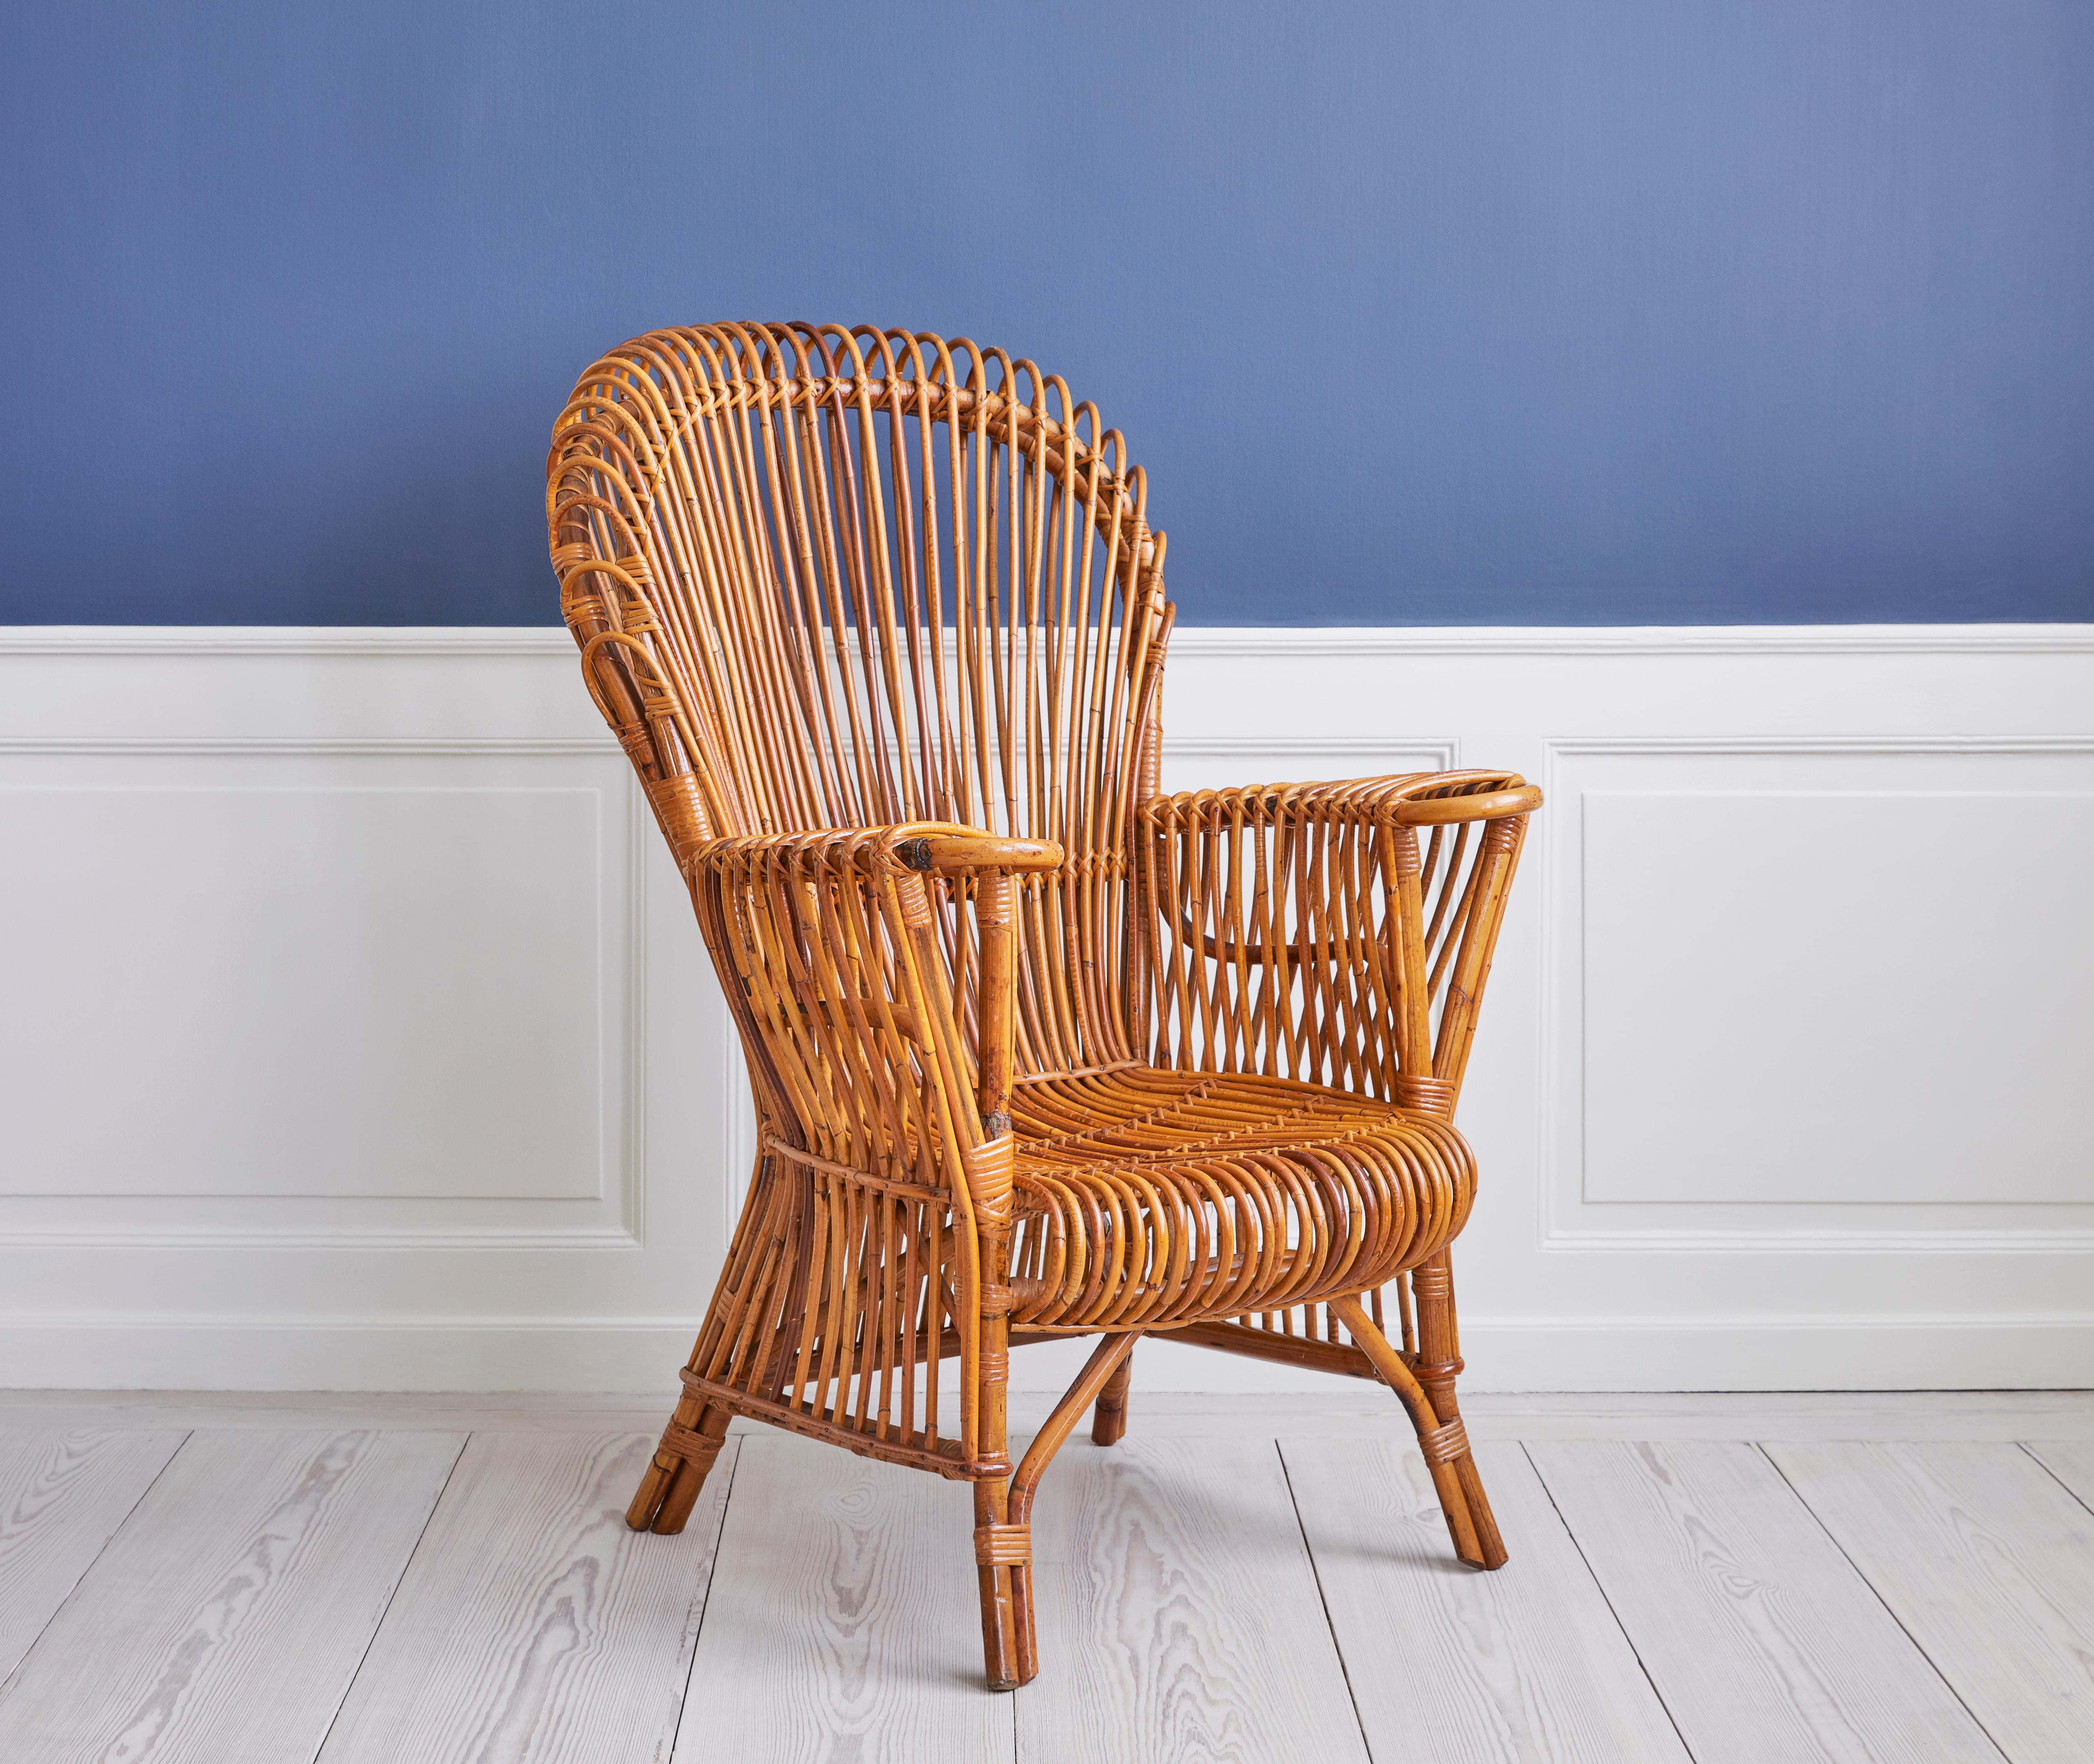 Sturdy vintage rattan armchair made in Italy during the 1950s.